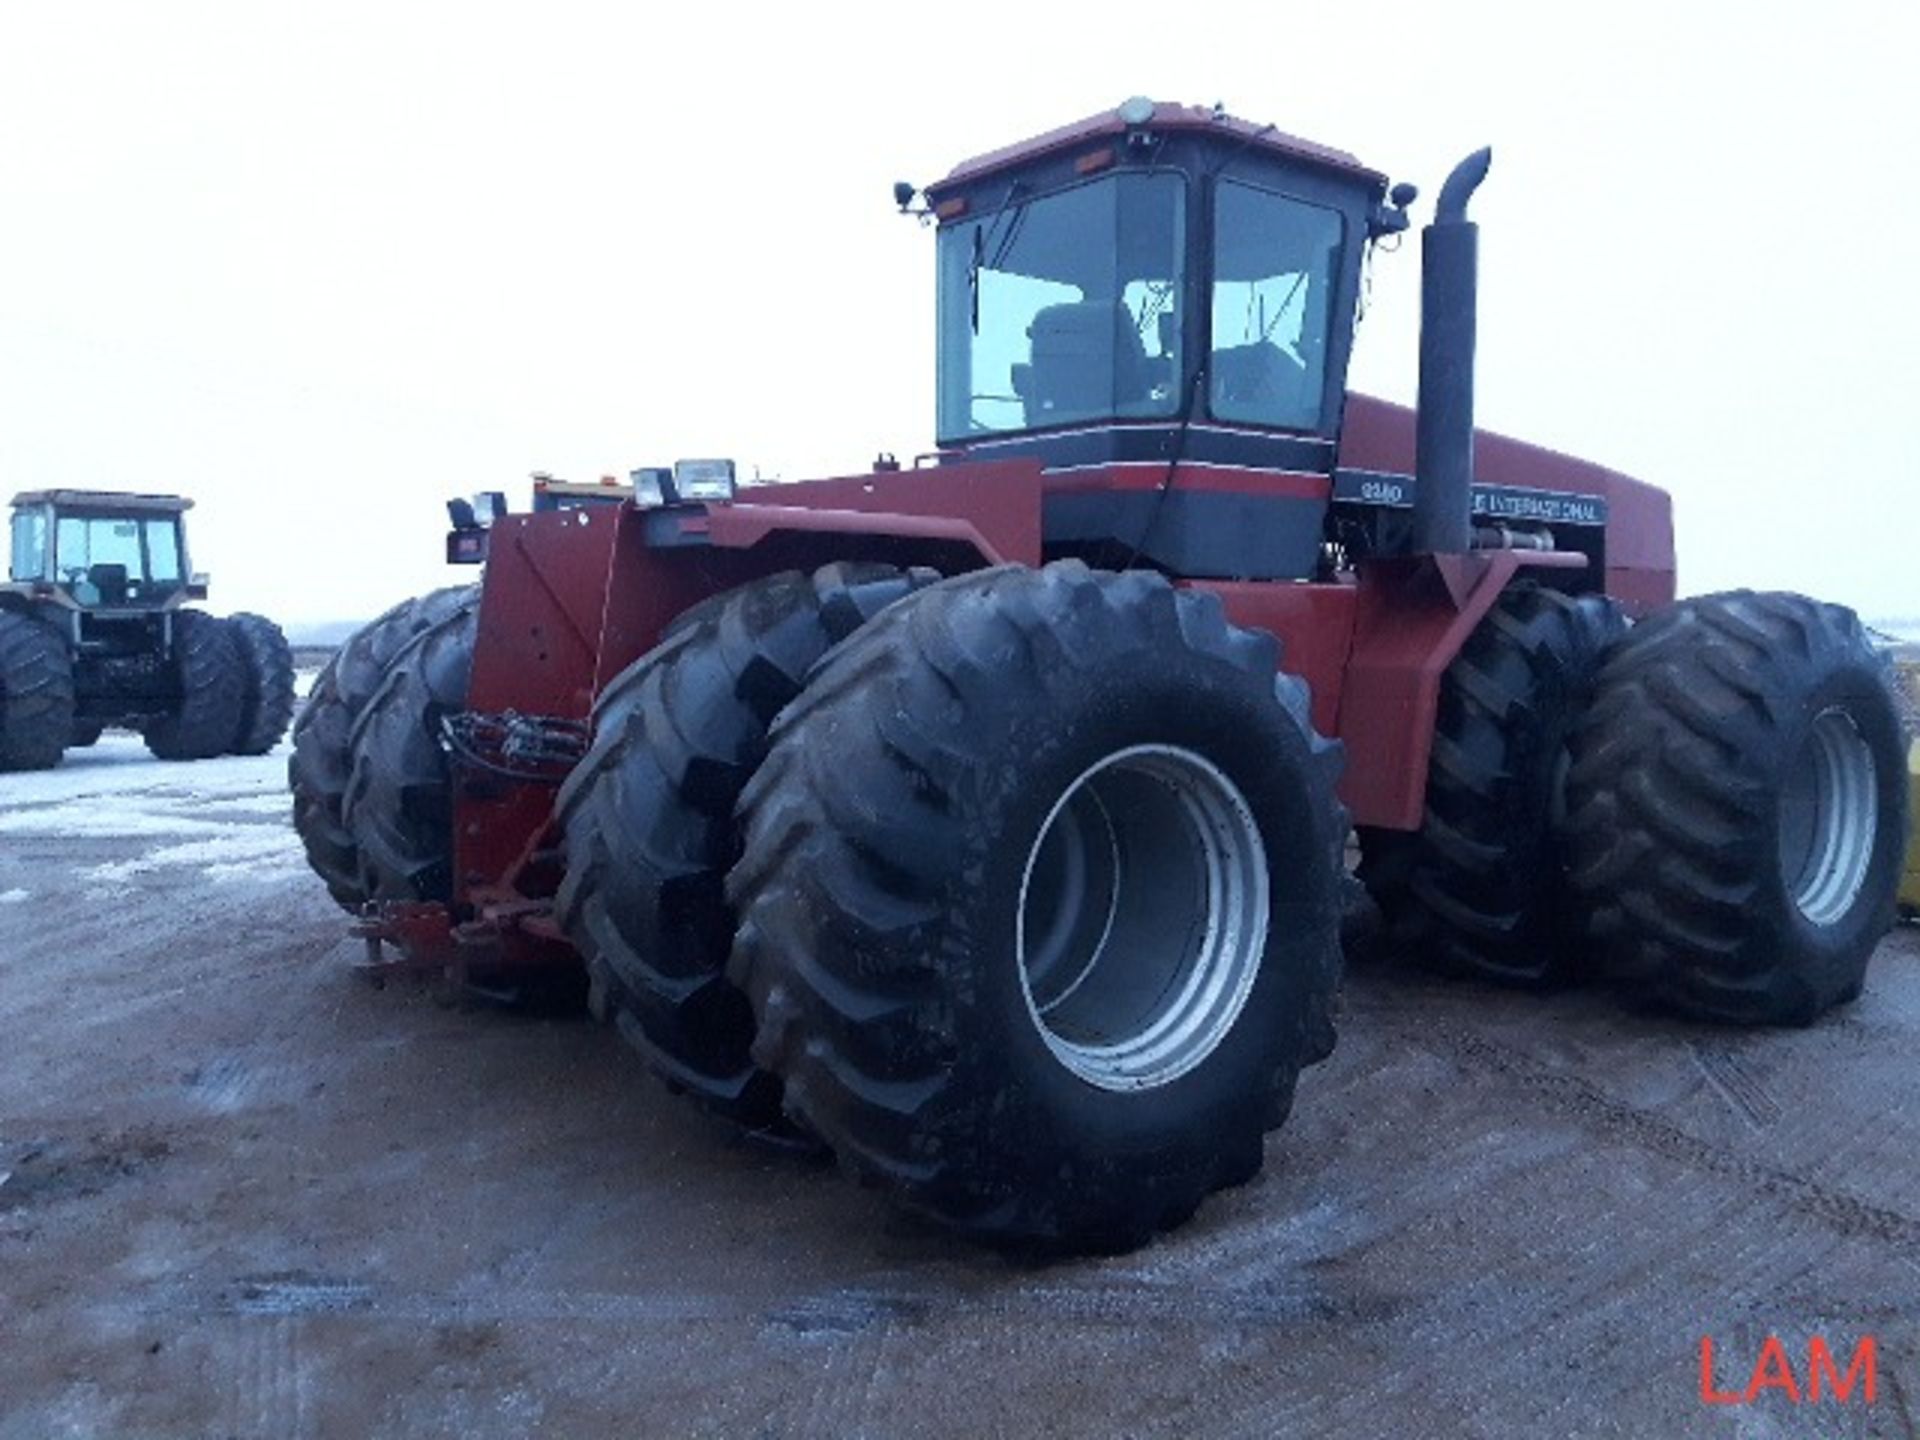 1995 9280 Case IH 4wd Tractor 375hp, 30.5-32 Duals, 1000 PTO Greenstar Ready (Center pins redone) - Image 3 of 7